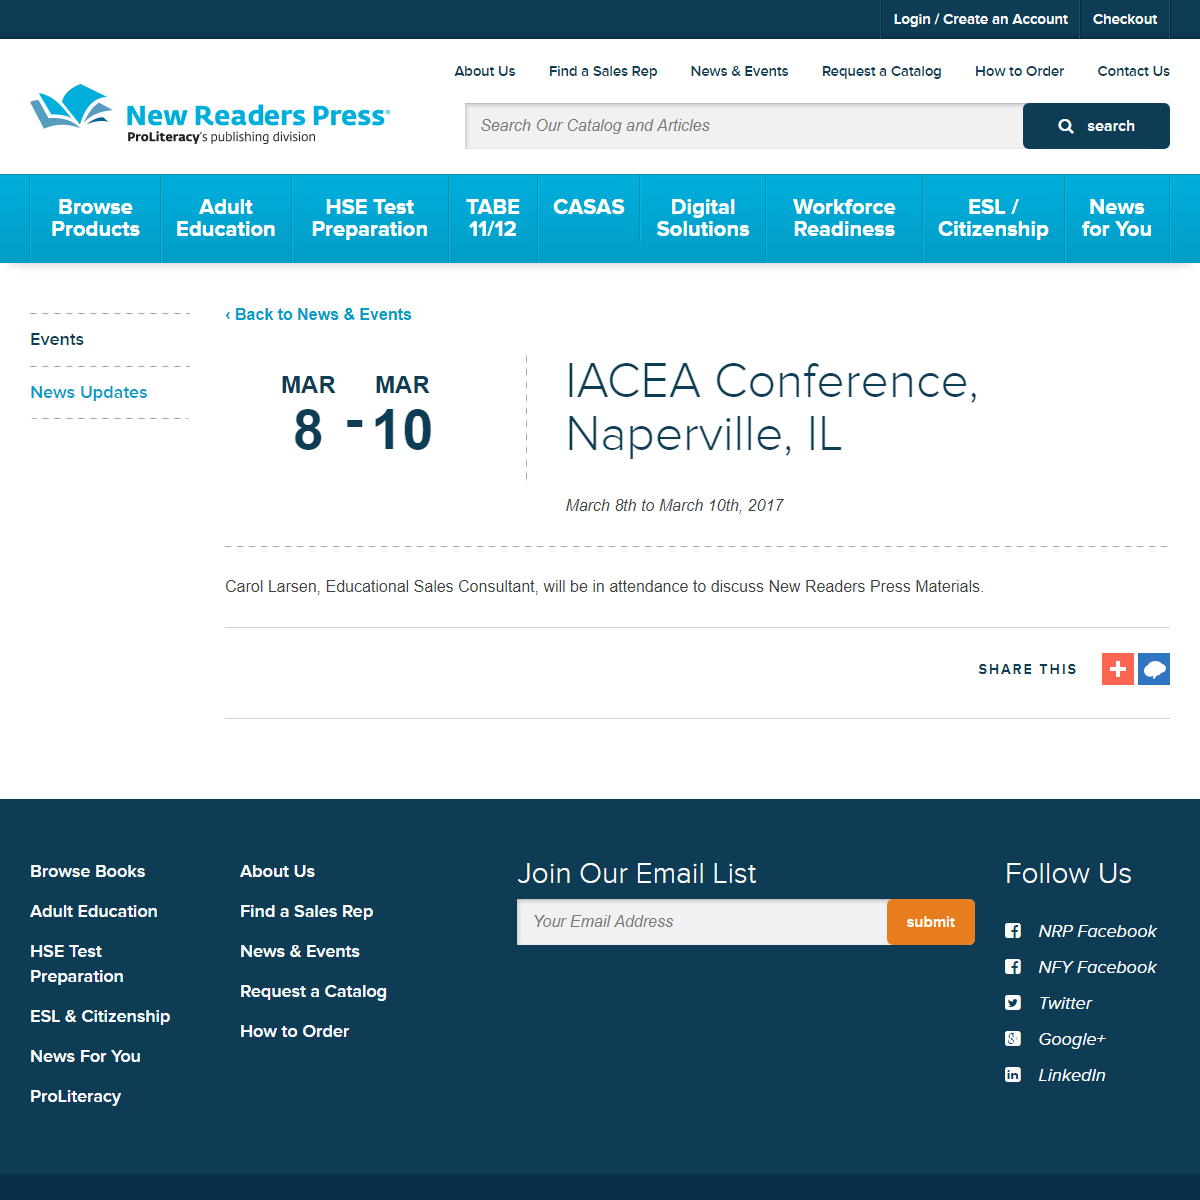 A complete backup of https://www.newreaderspress.com/iacea-conference